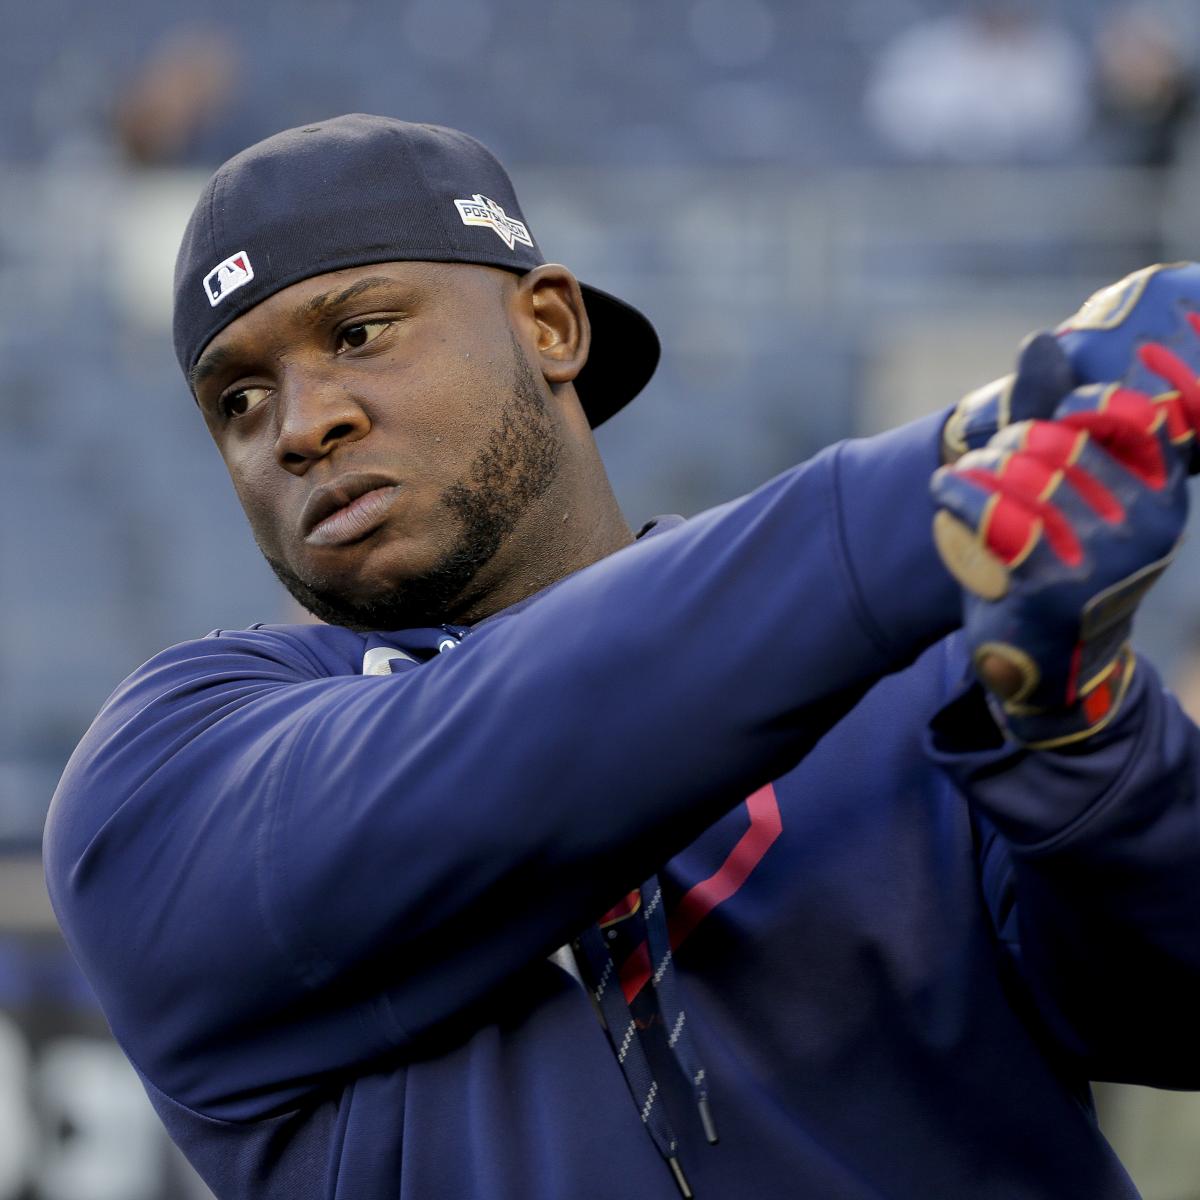 Minnesota Twins' Miguel Sano won't face charges after accident. police say  - ESPN